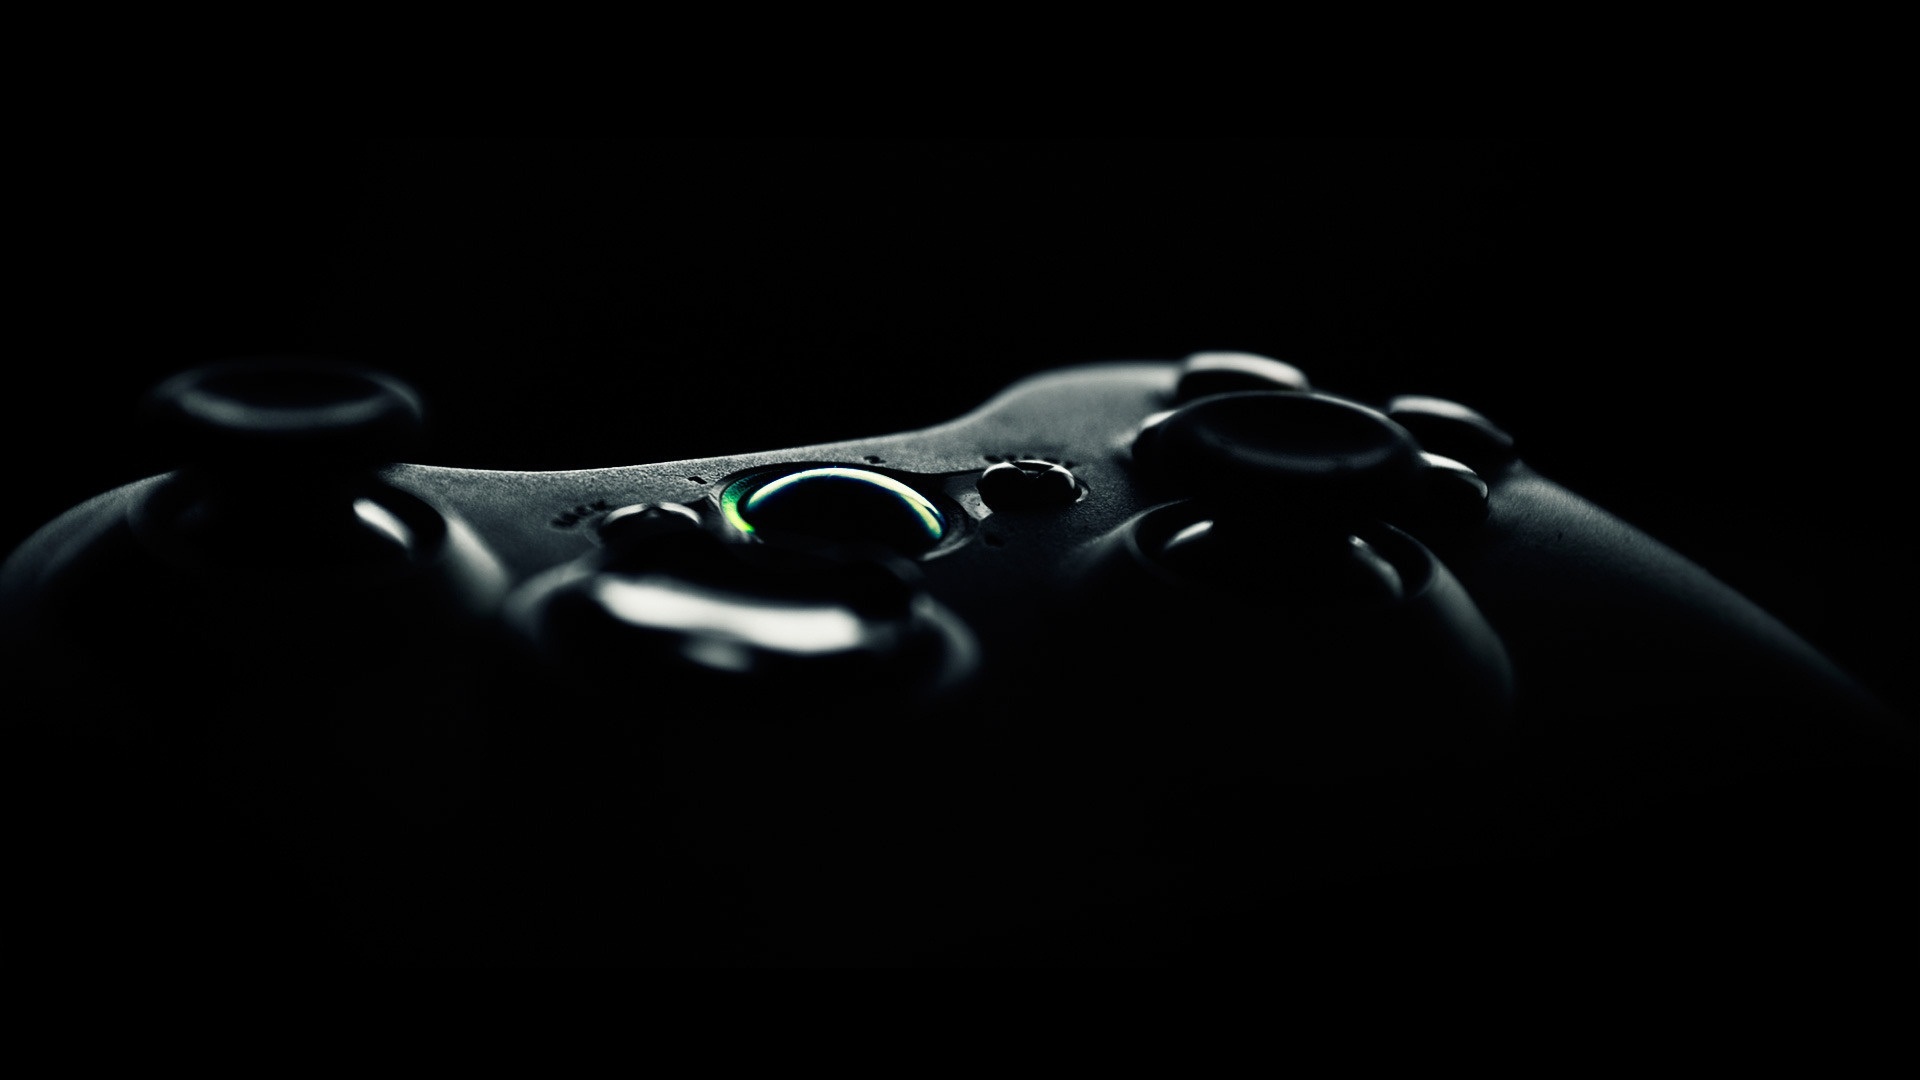 Xbox: Microsoft's game console, Introduced at the Game Developers Conference in 2000. 1920x1080 Full HD Wallpaper.